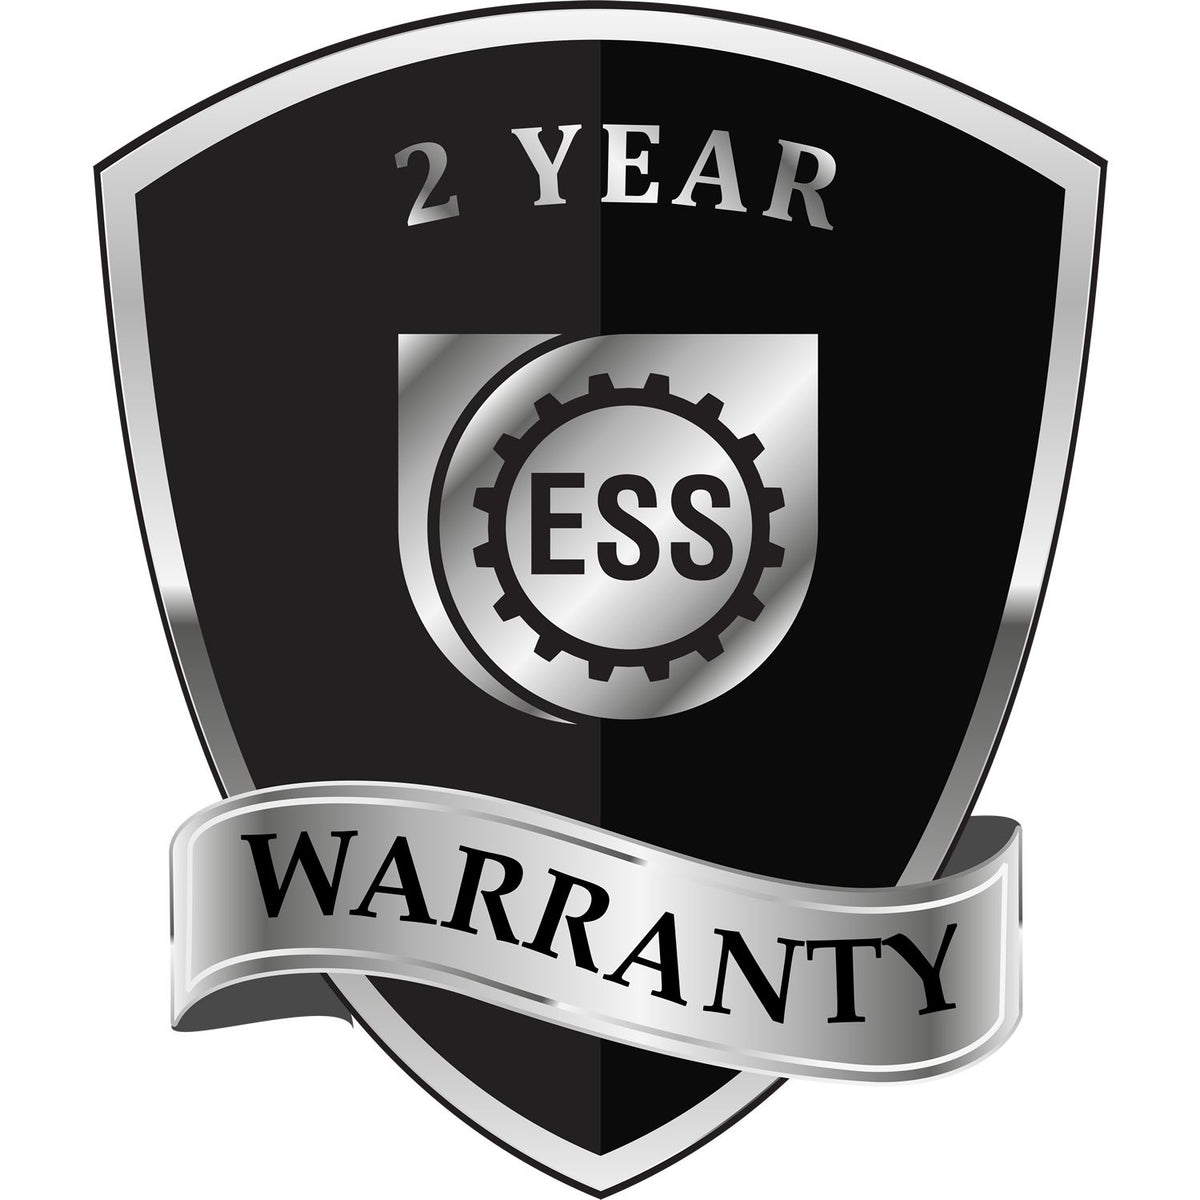 A black and silver badge or emblem showing warranty information for the Hybrid Florida Architect Seal